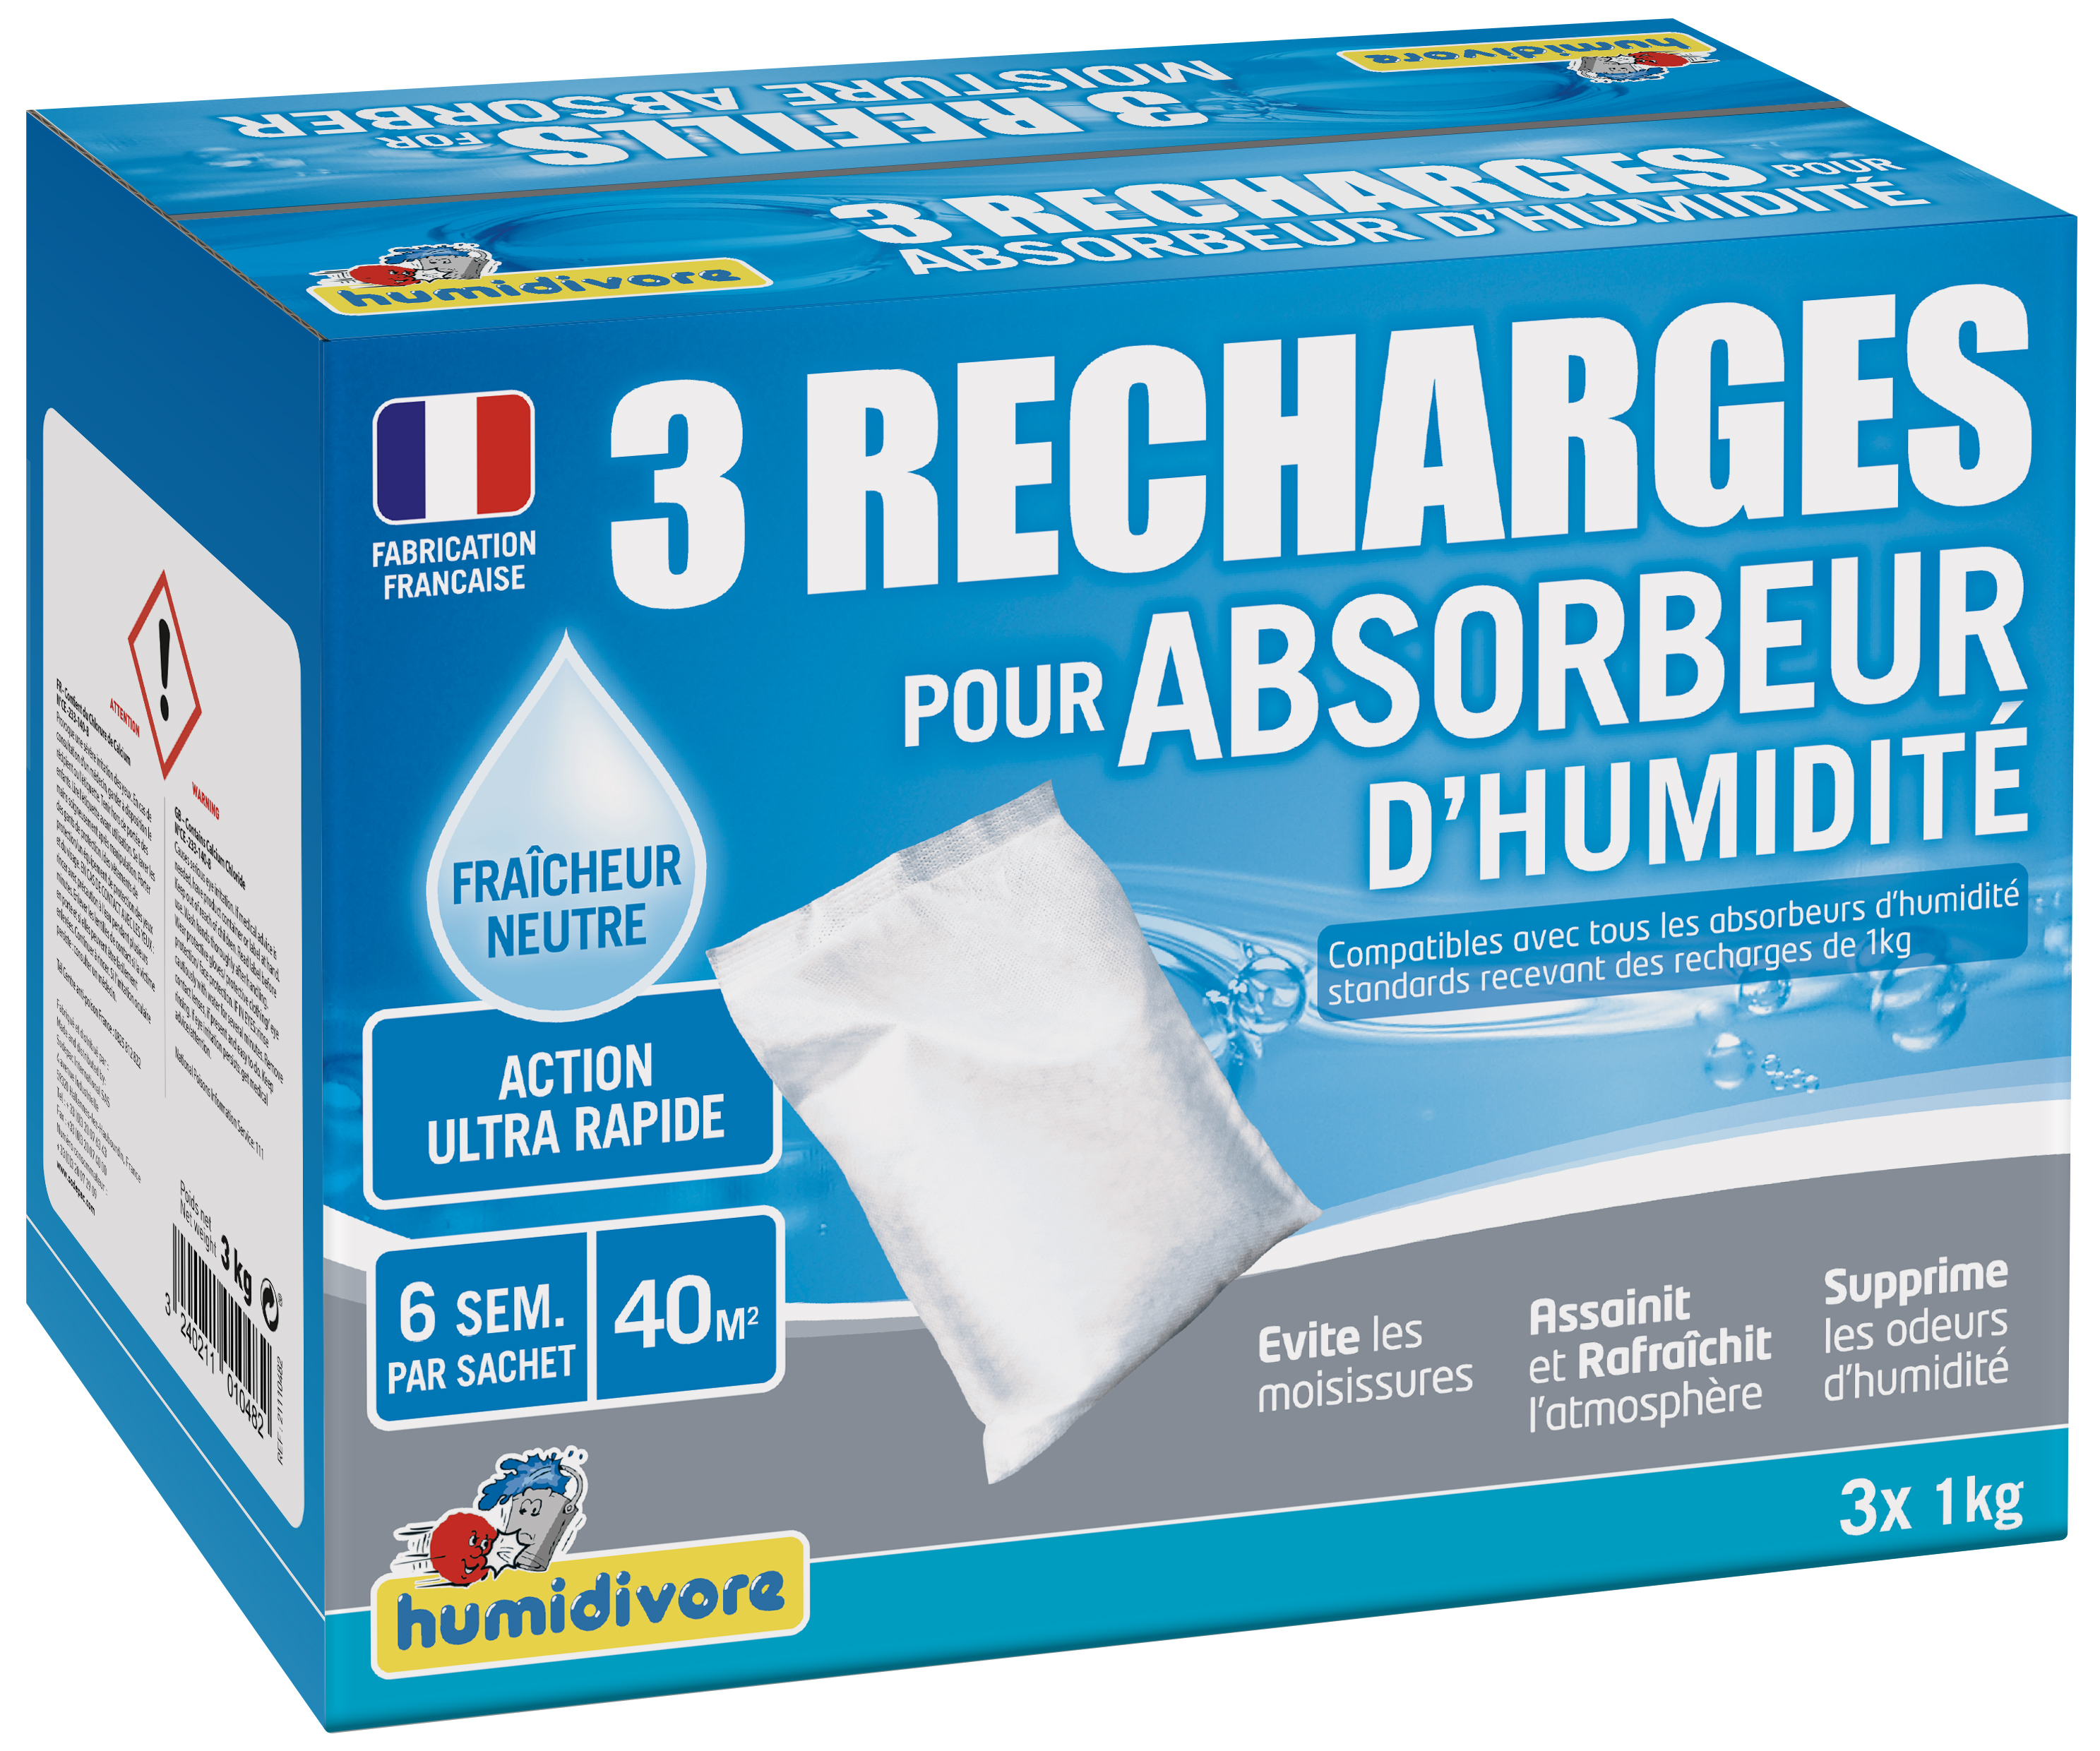 RECHARGE ABSORBEUR D'HUMIDITE